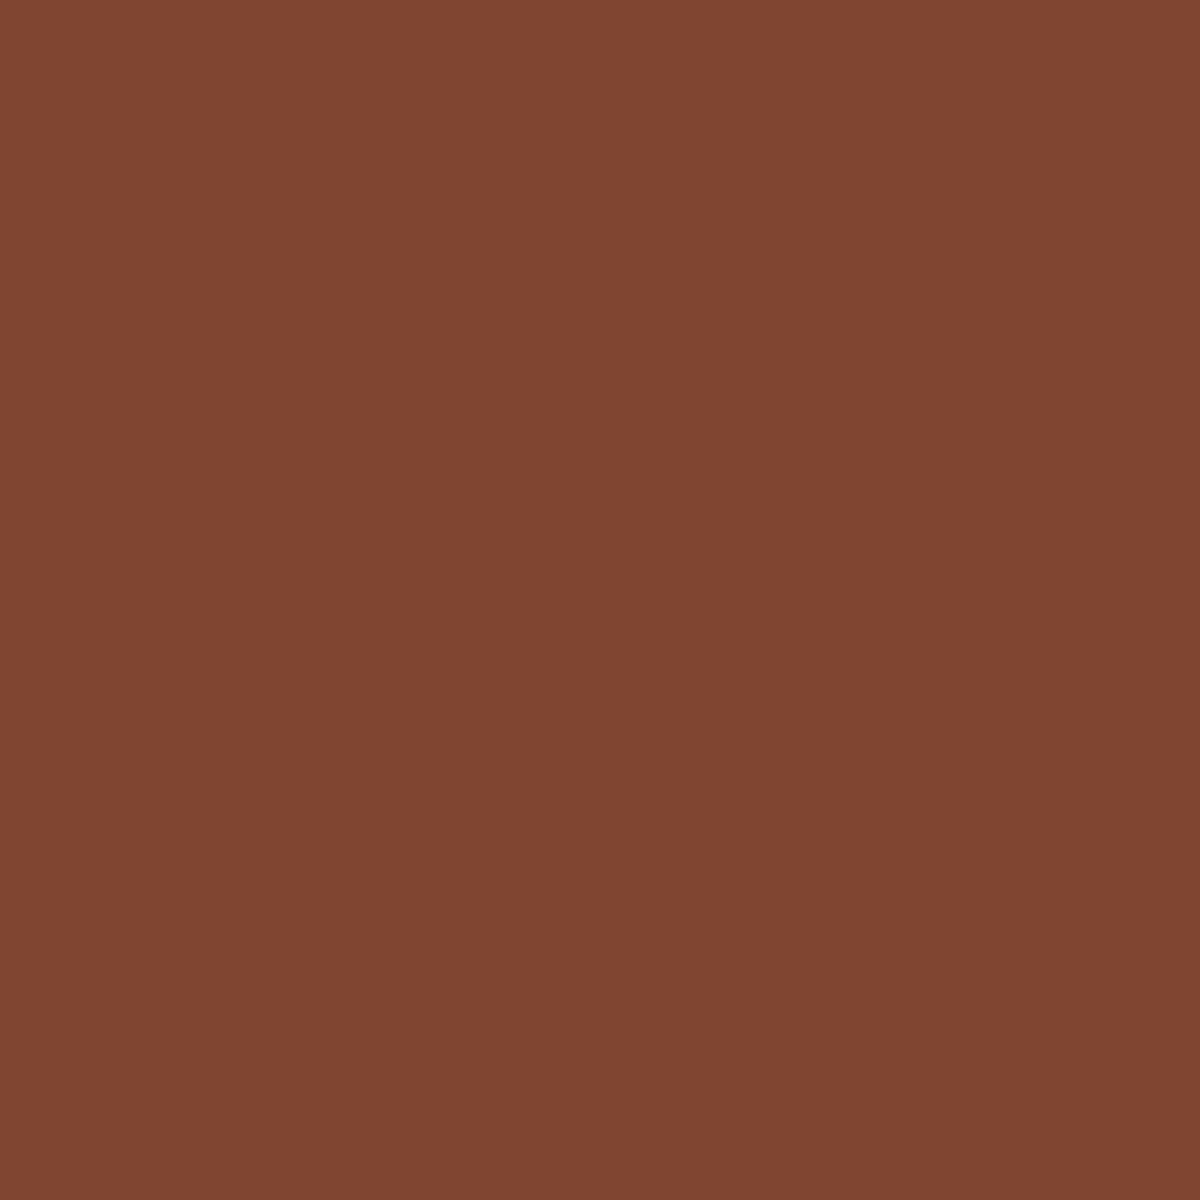 Earthly Russet 2173-10